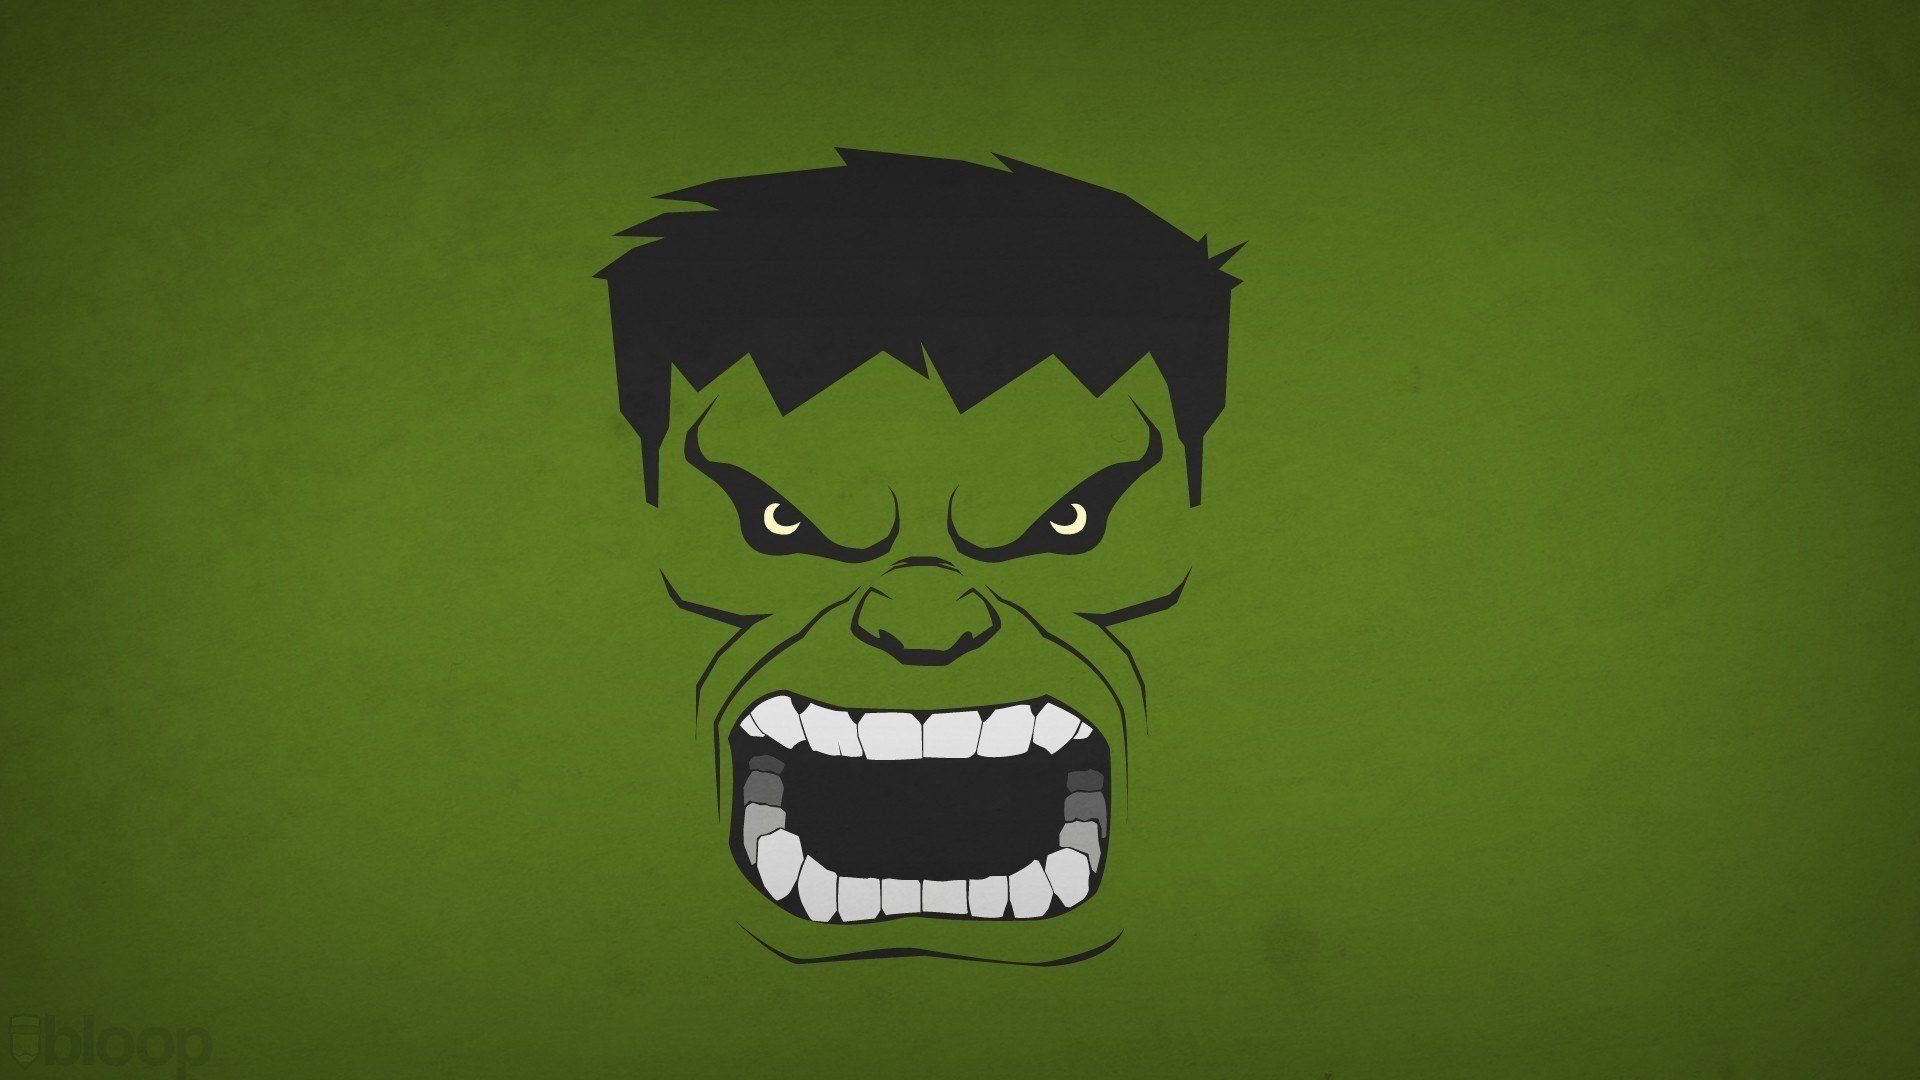 Hulk 4K wallpaper for your desktop or mobile screen free and easy to download